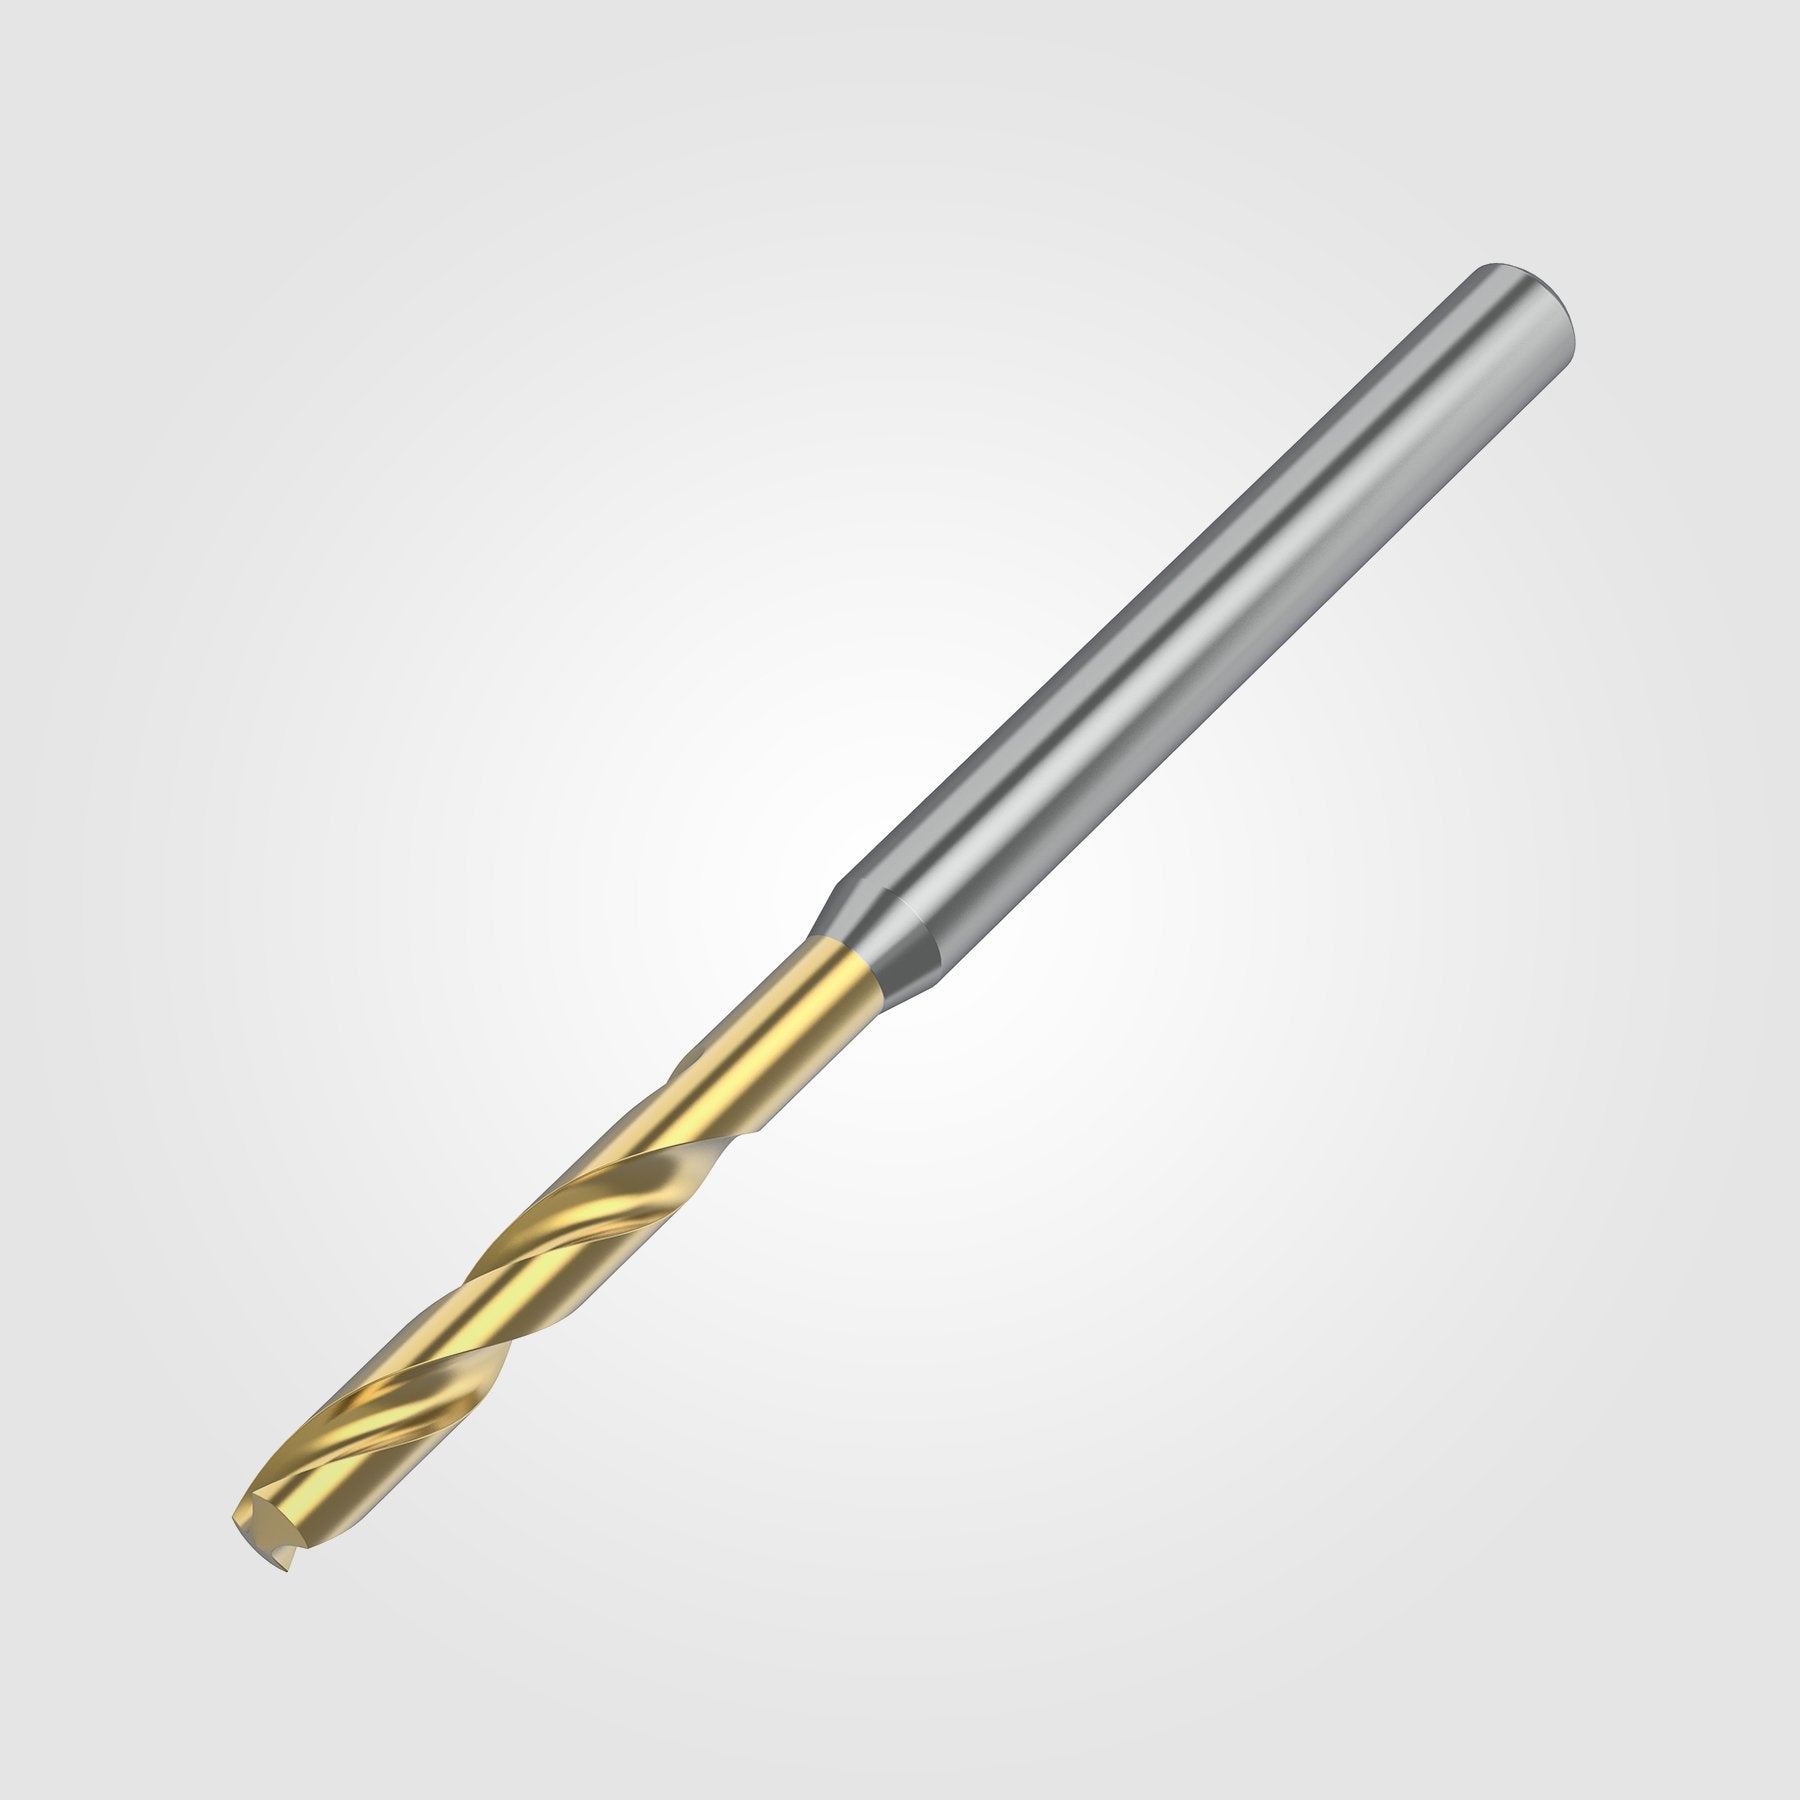 GOdrill (THROUGH COOLANT) | 9.2mm / .3622" / 3xD | SOLID CARBIDE DRILL | 4151191